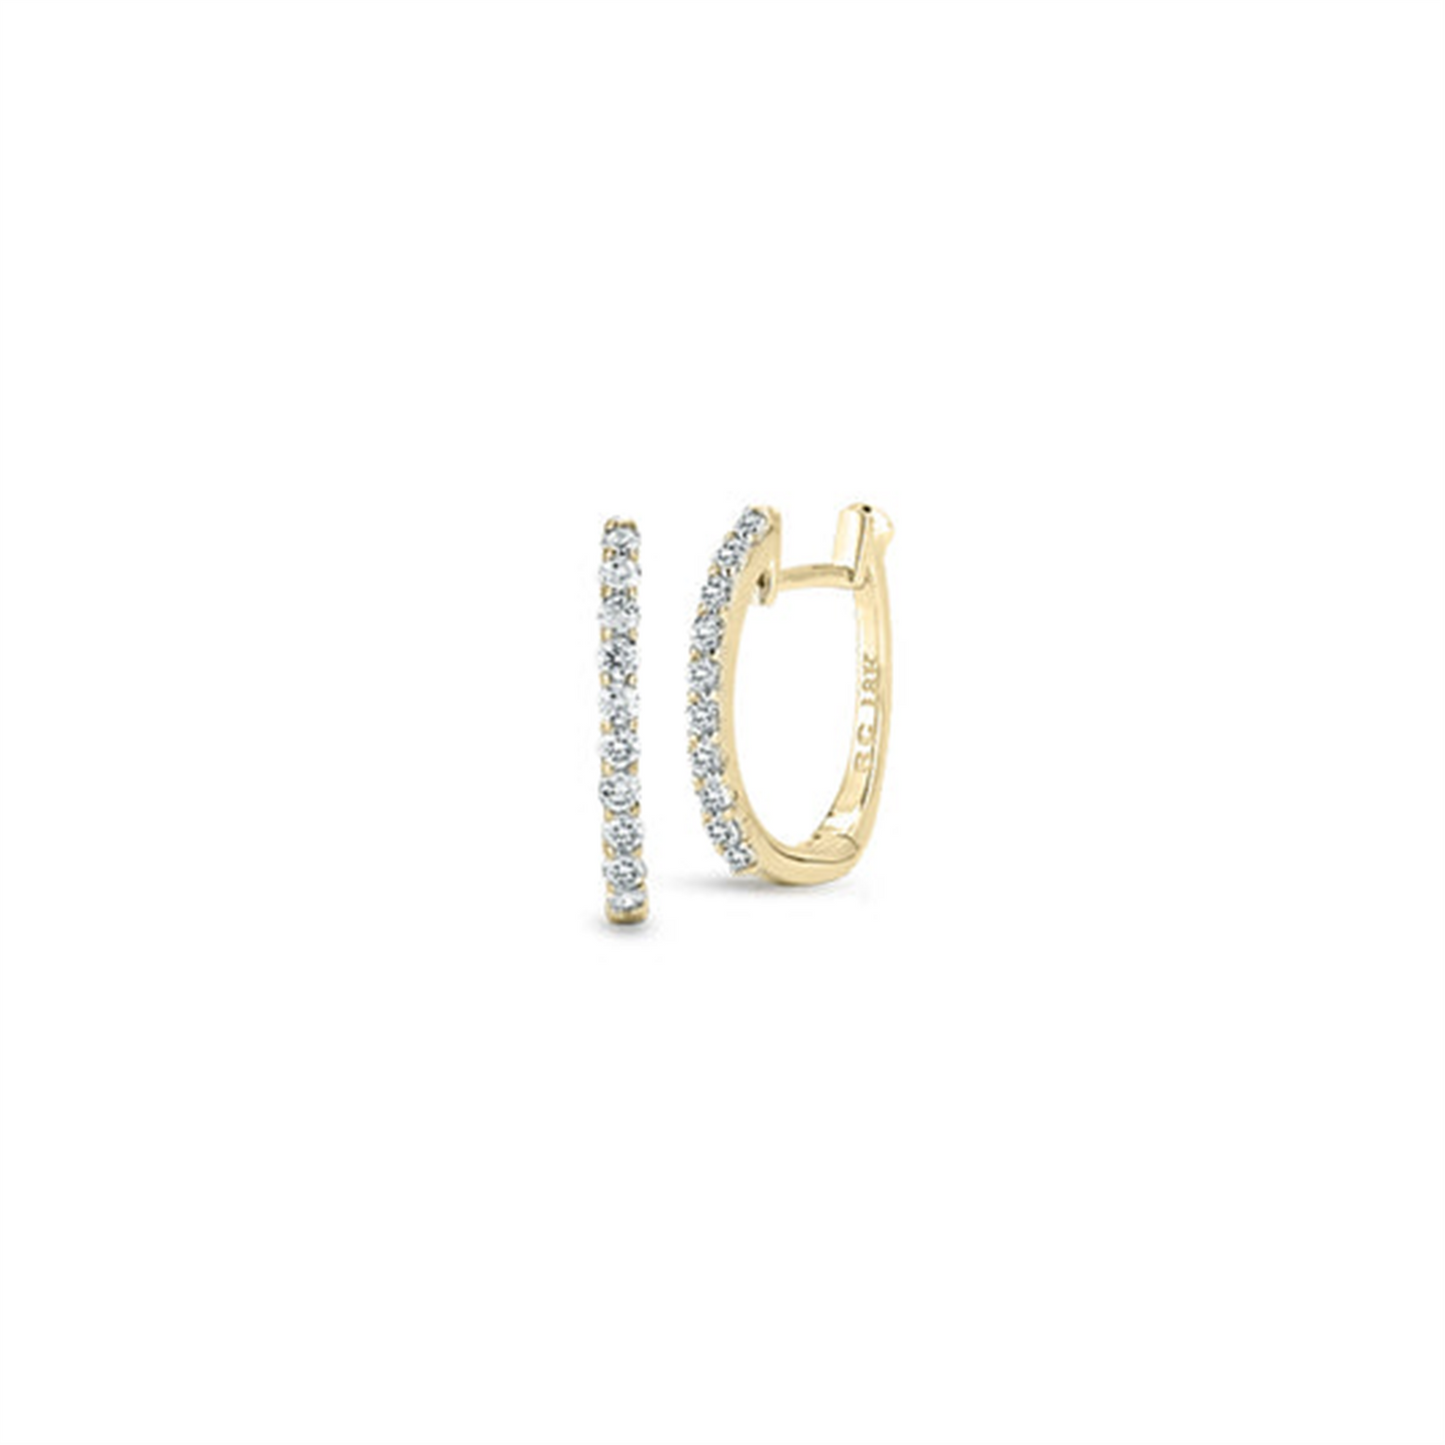 Roberto Coin Huggy Earrings with Micropave Diamonds